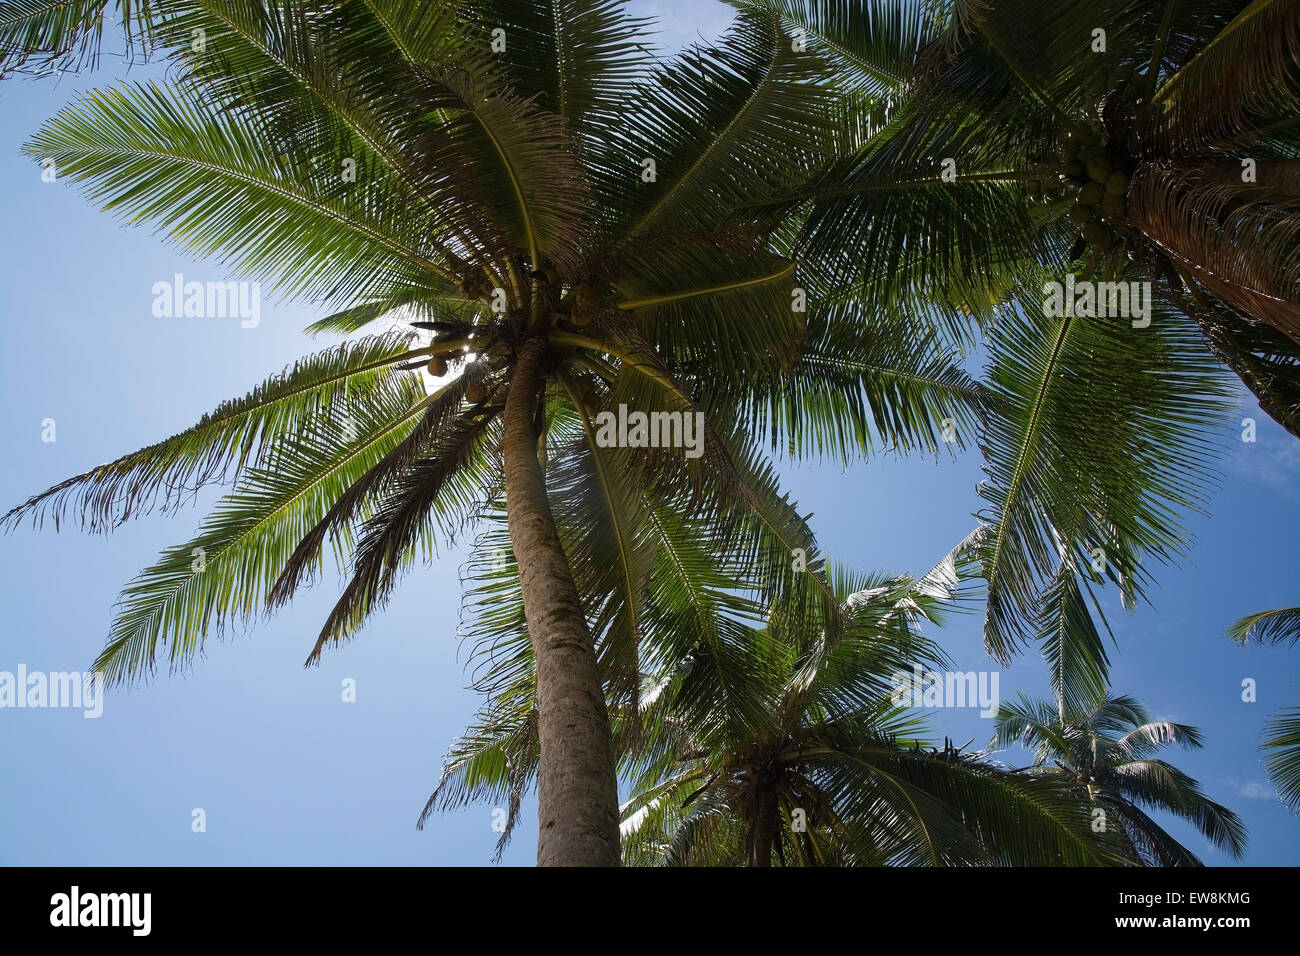 Coconut palm trees with fruit in remote location, Southern Province, Sri Lanka, Asia. Stock Photo